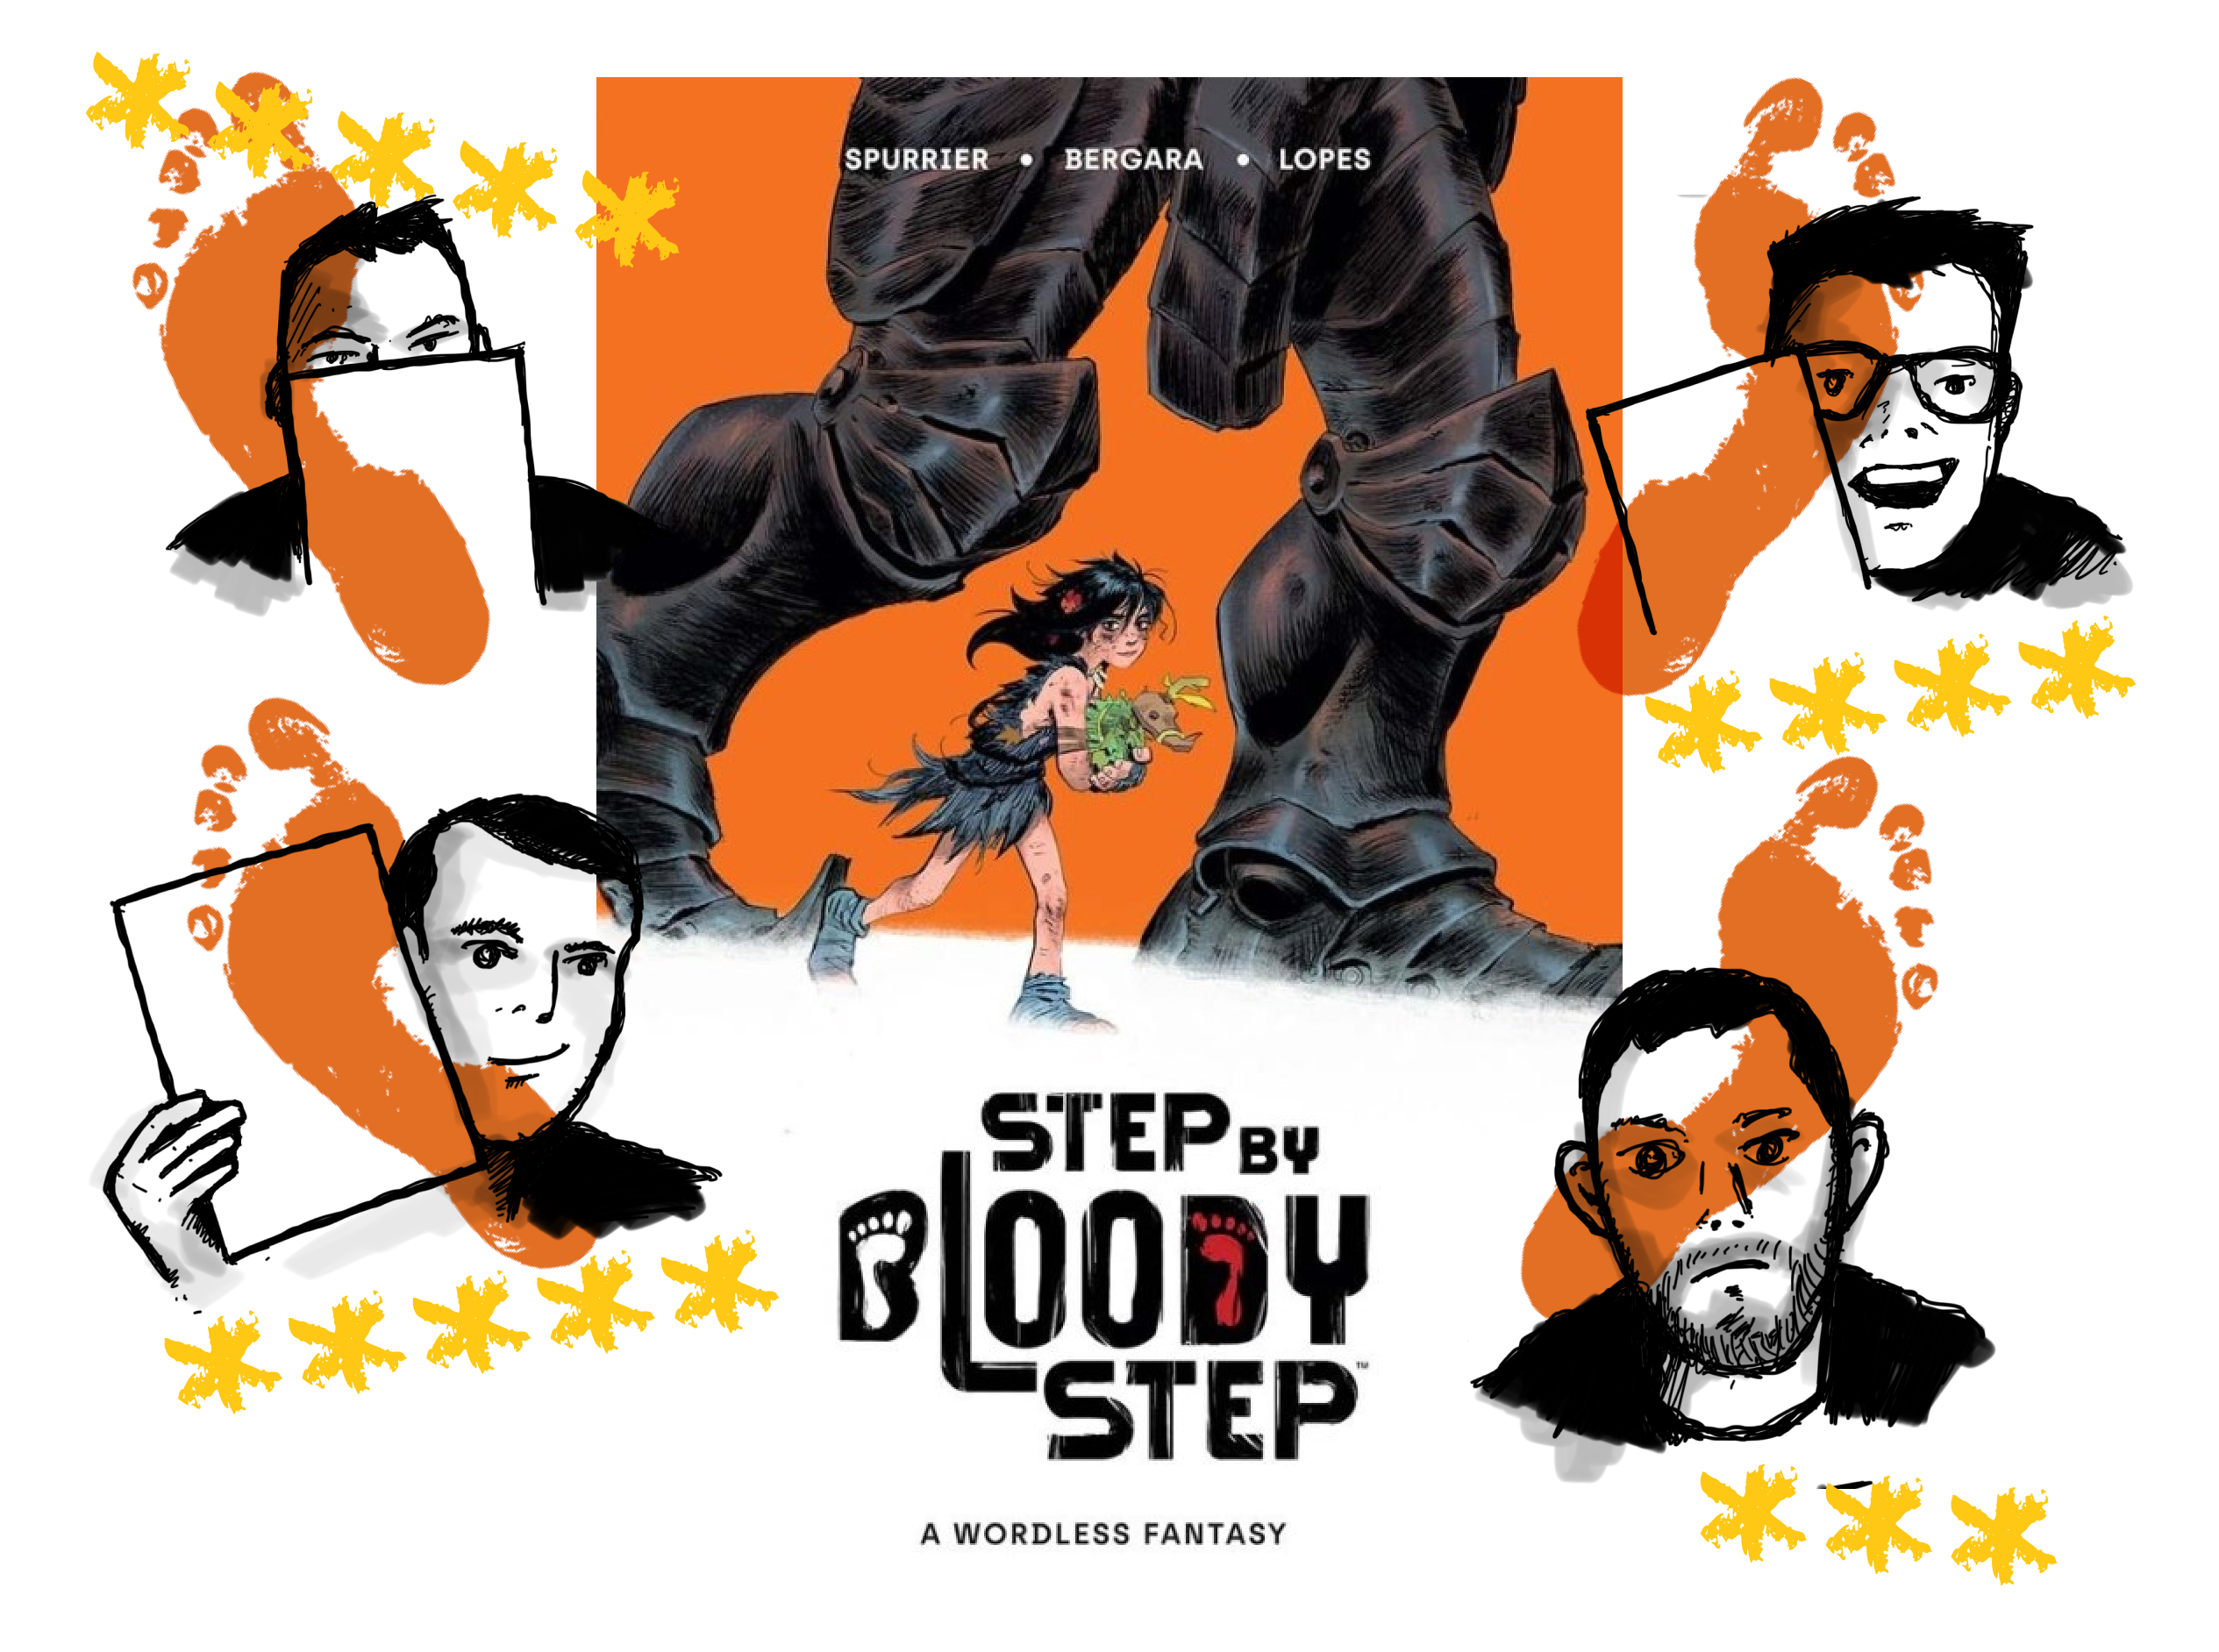 Our wordless review of Step by Bloody Step. Jake and Dan gave the book 5 stars. Tom rated it 4 and Paul felt it was worth a 3